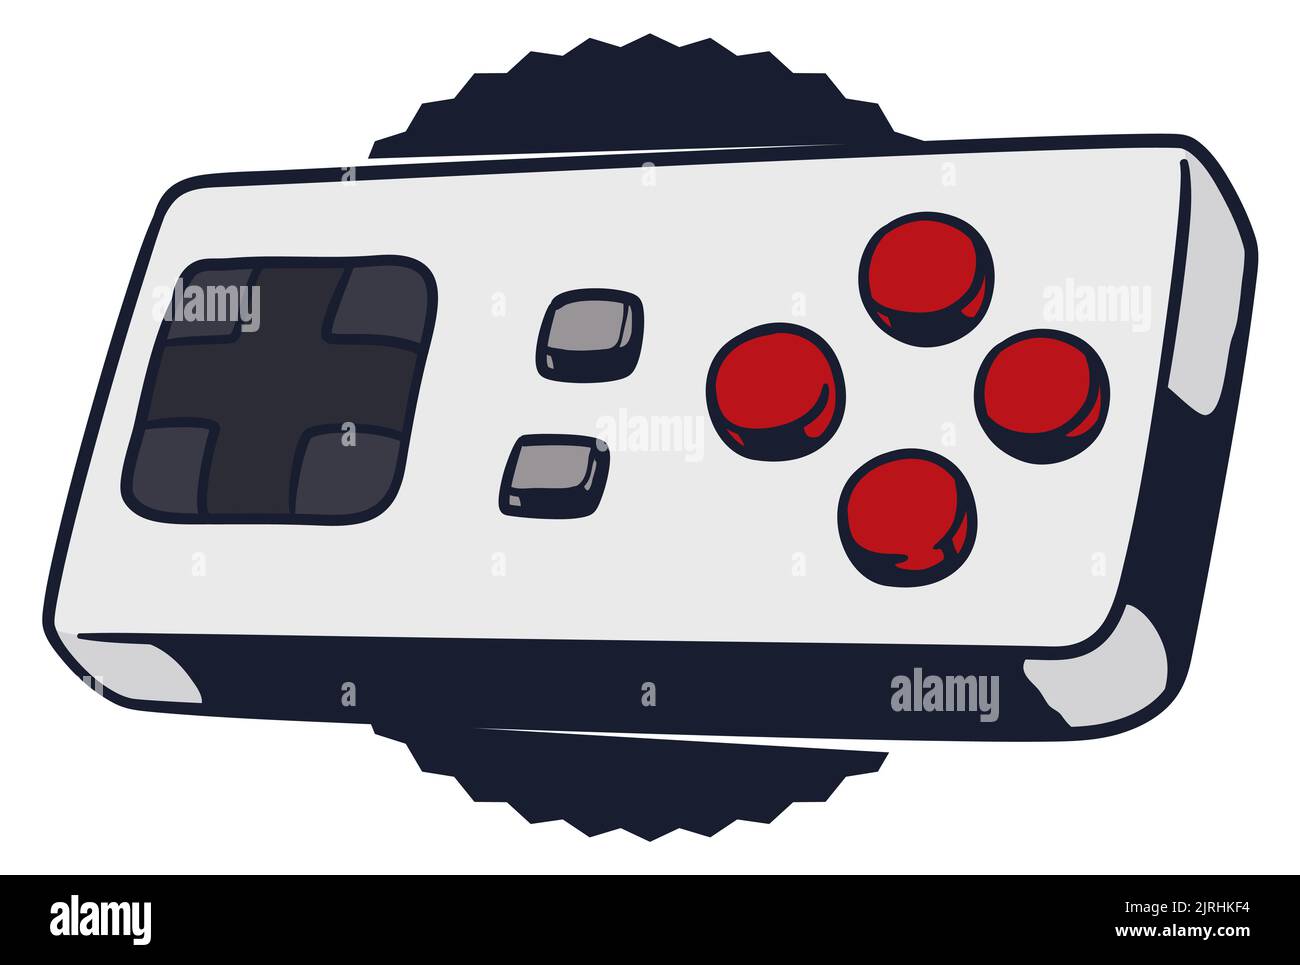 Design in flat style with classic video game controller, with Dpad and buttons over a dark button. Stock Vector